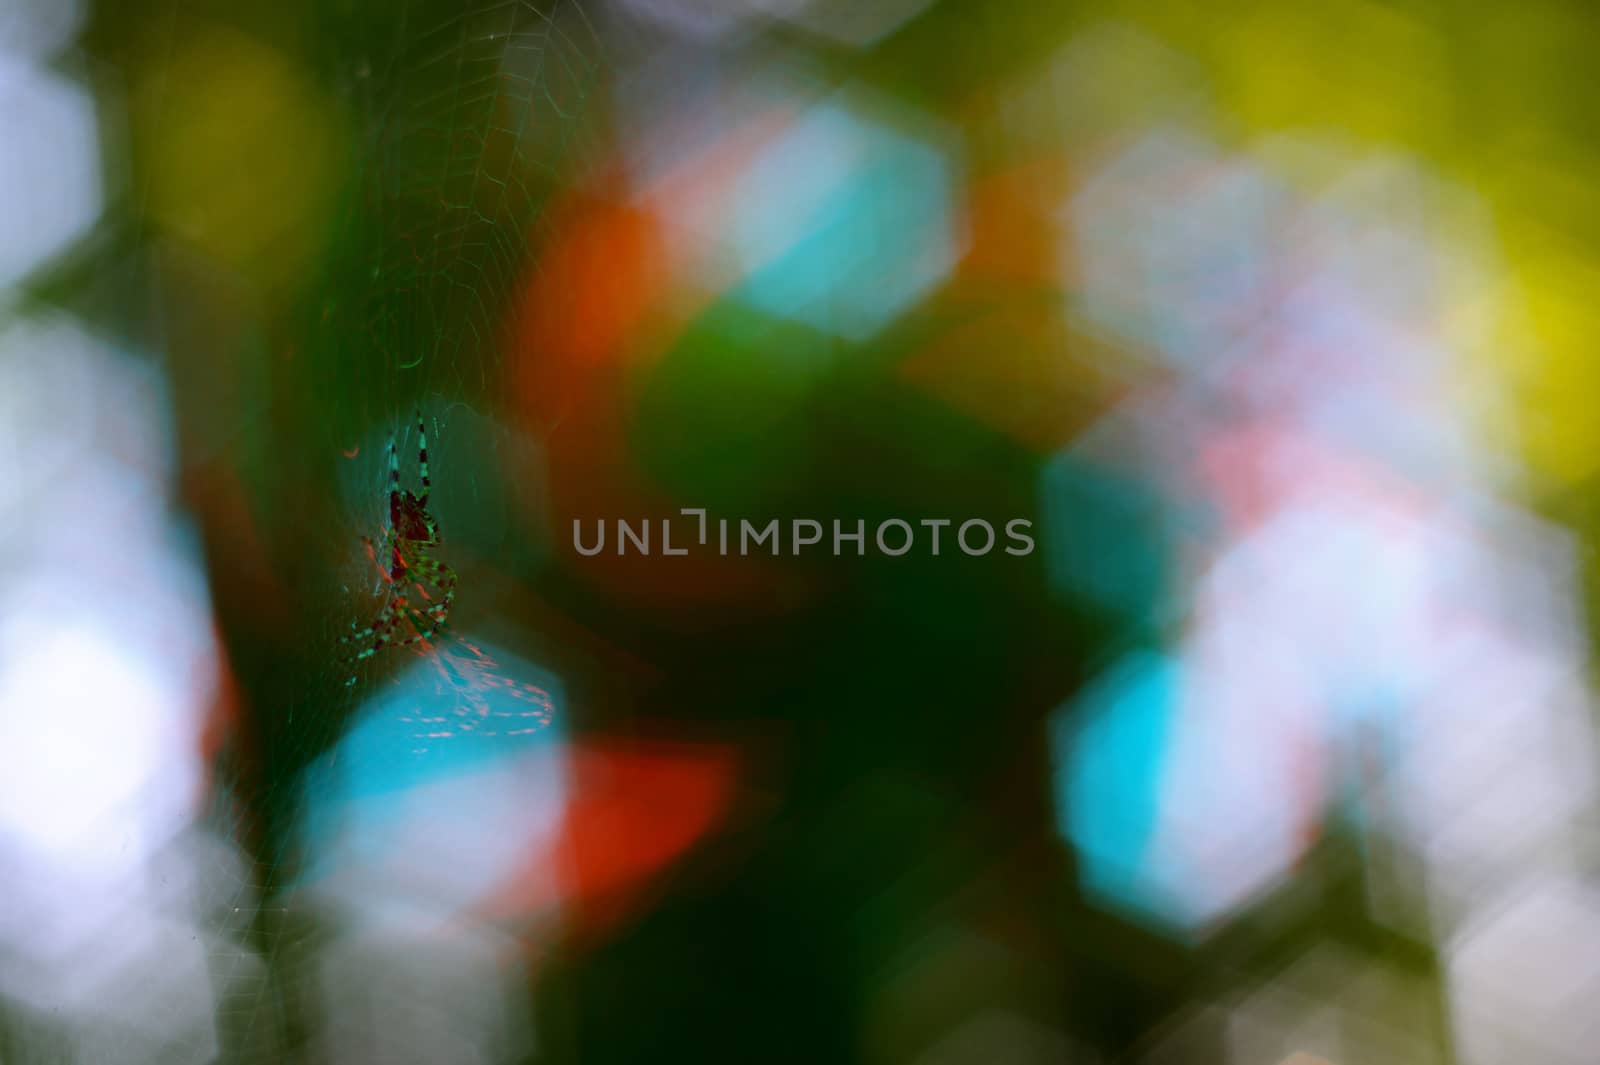 Small spider handing in spiderweb. On background curly green bokeh with colour splash. by alexsdriver